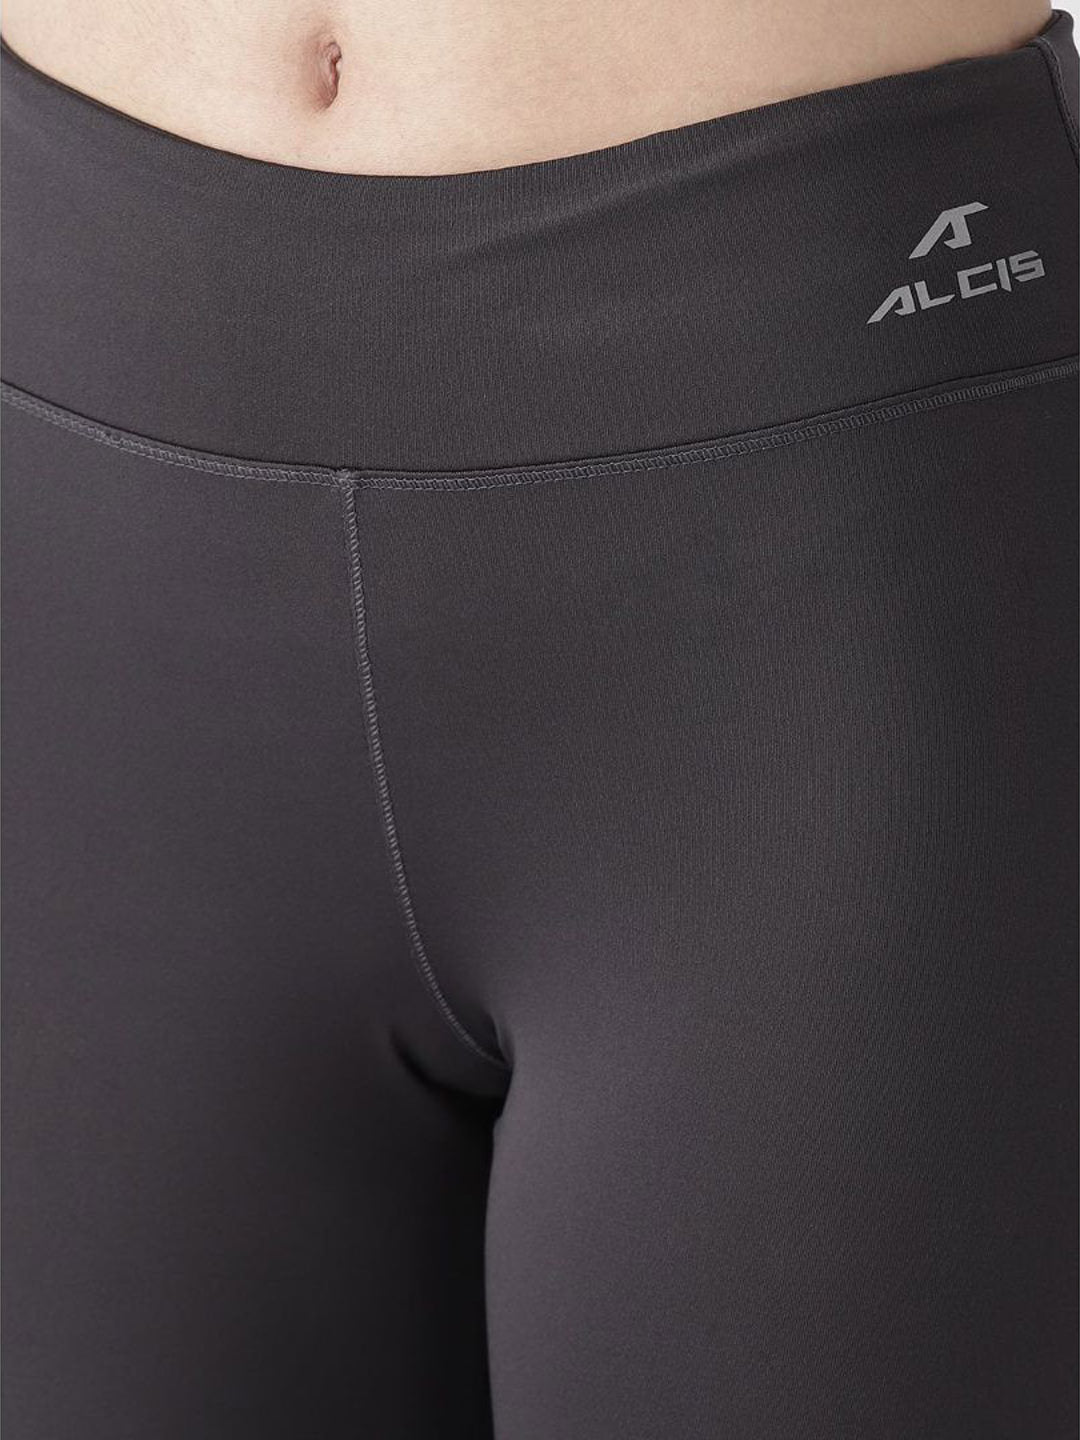 Alcis Women Charcoal Grey Solid Training Tights